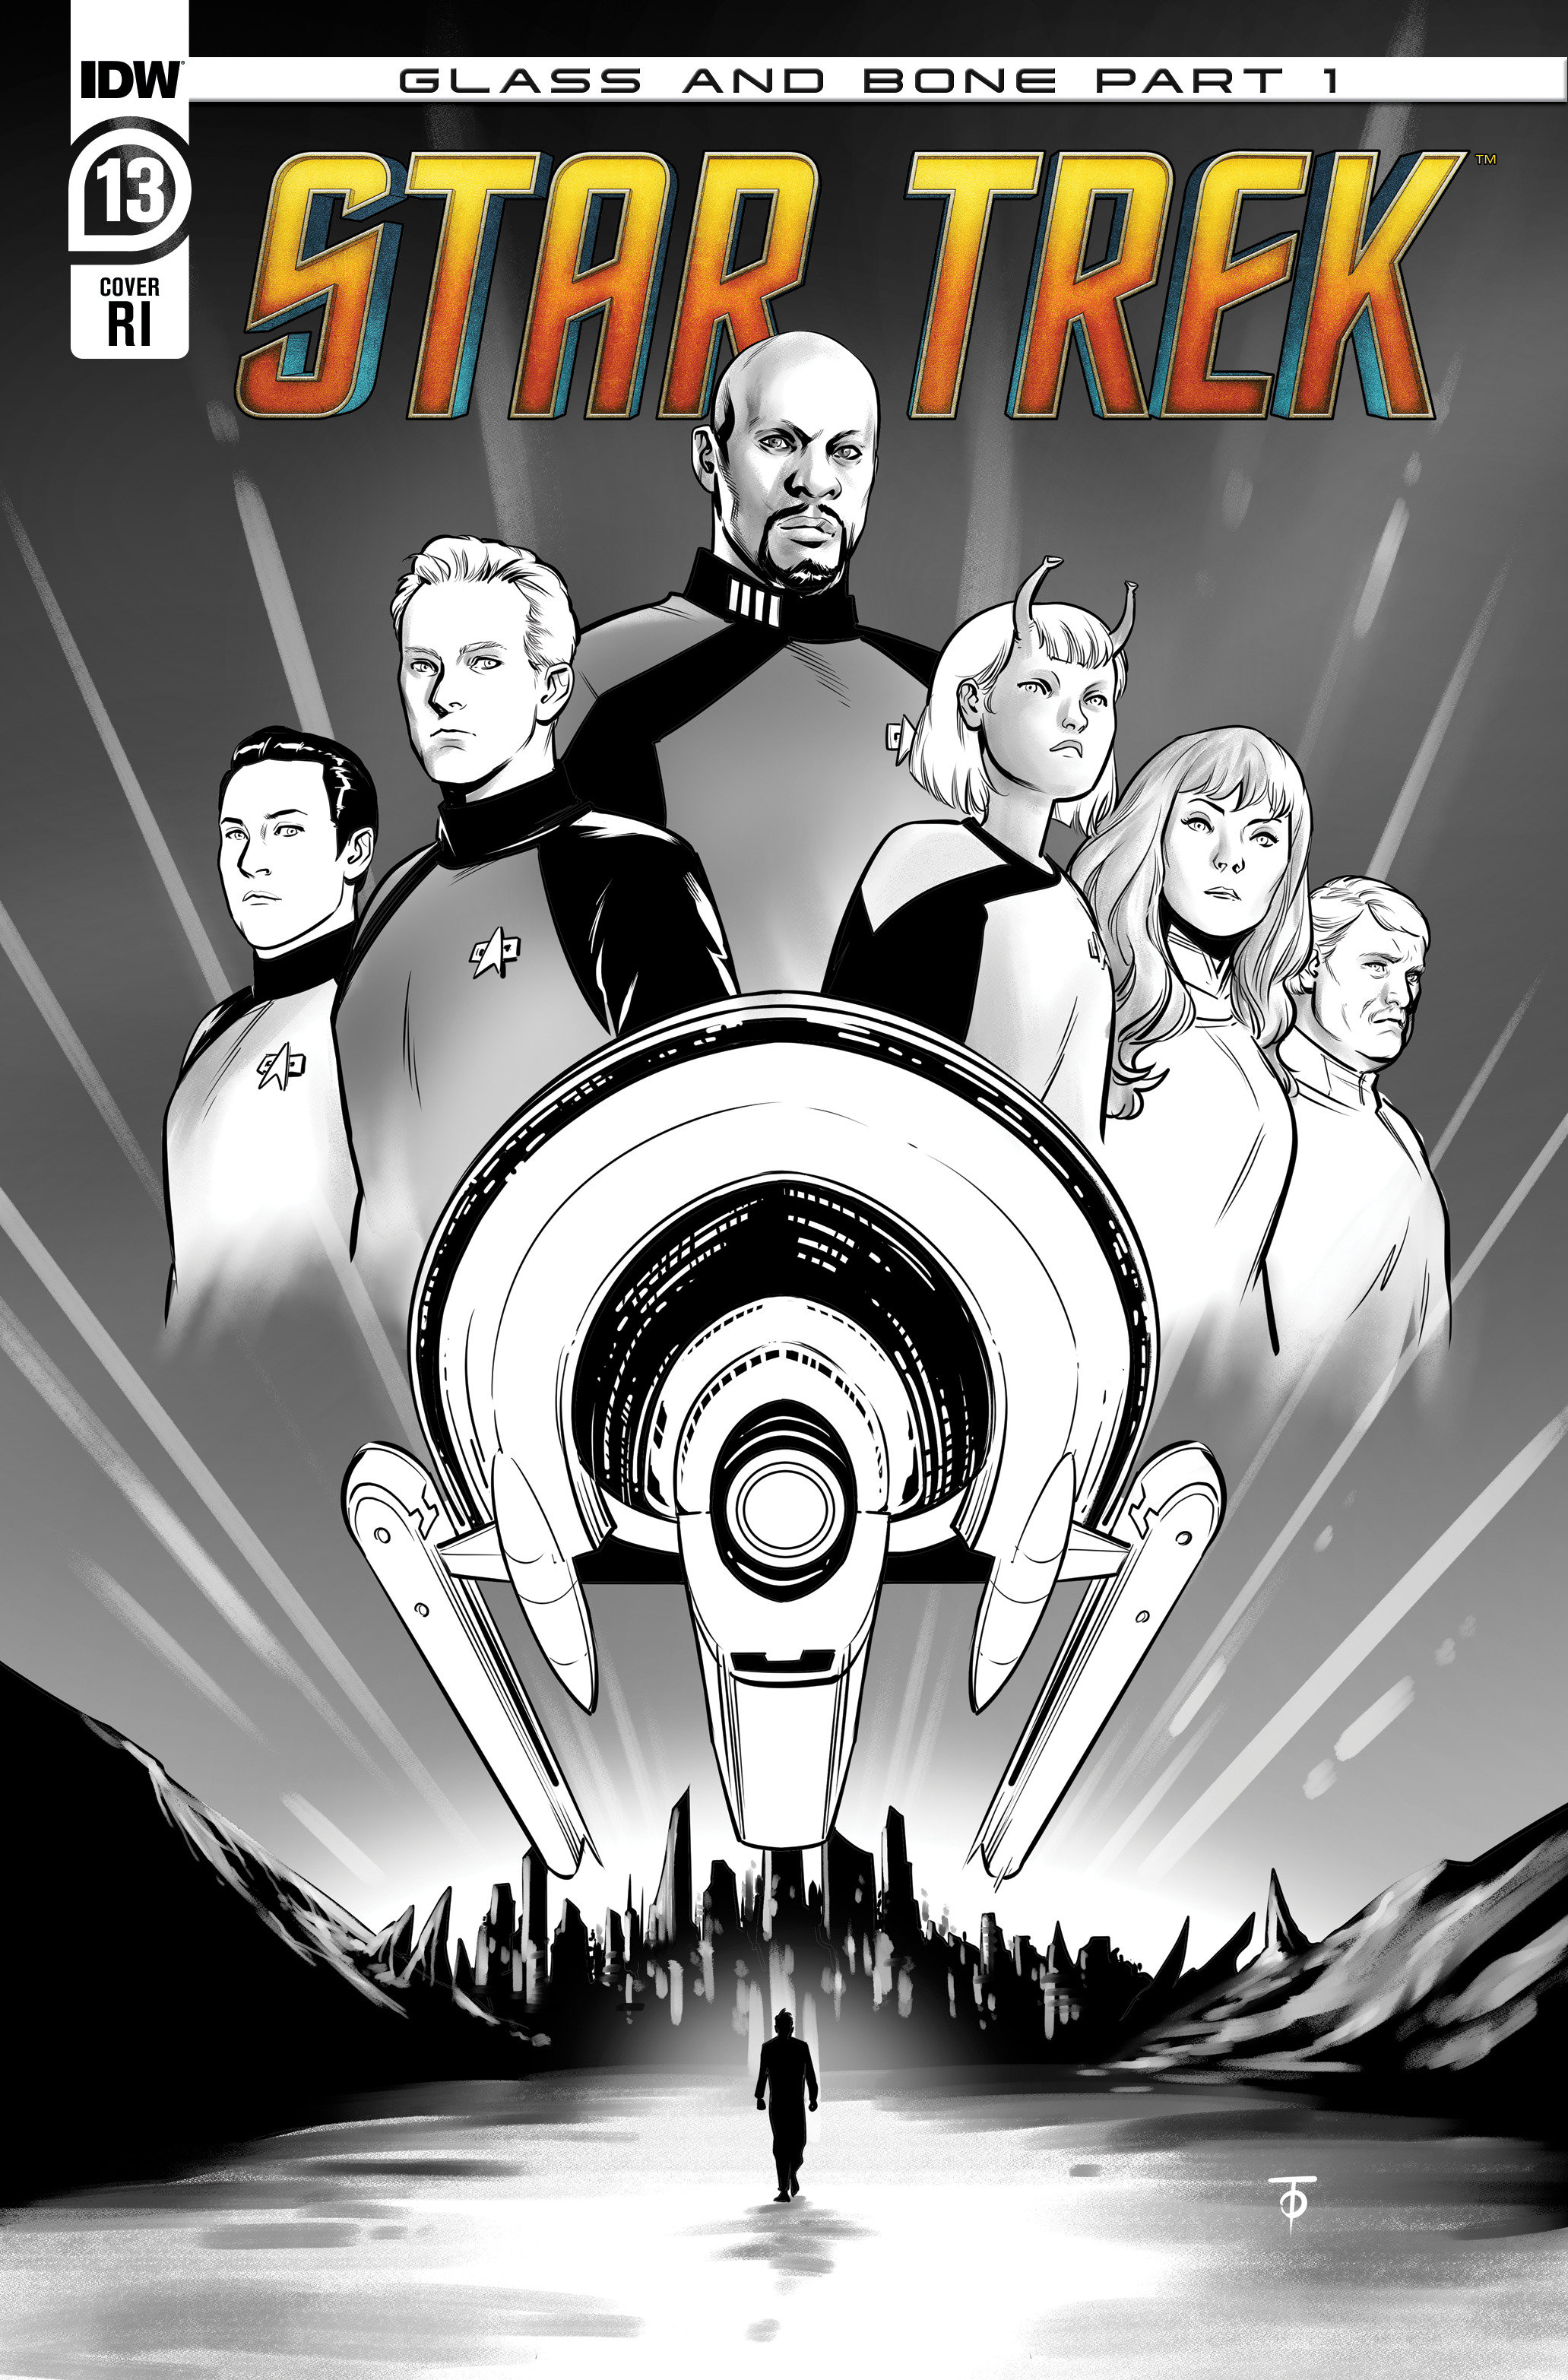 Star Trek #13 Cover To B&W 1 for 10 Incentive